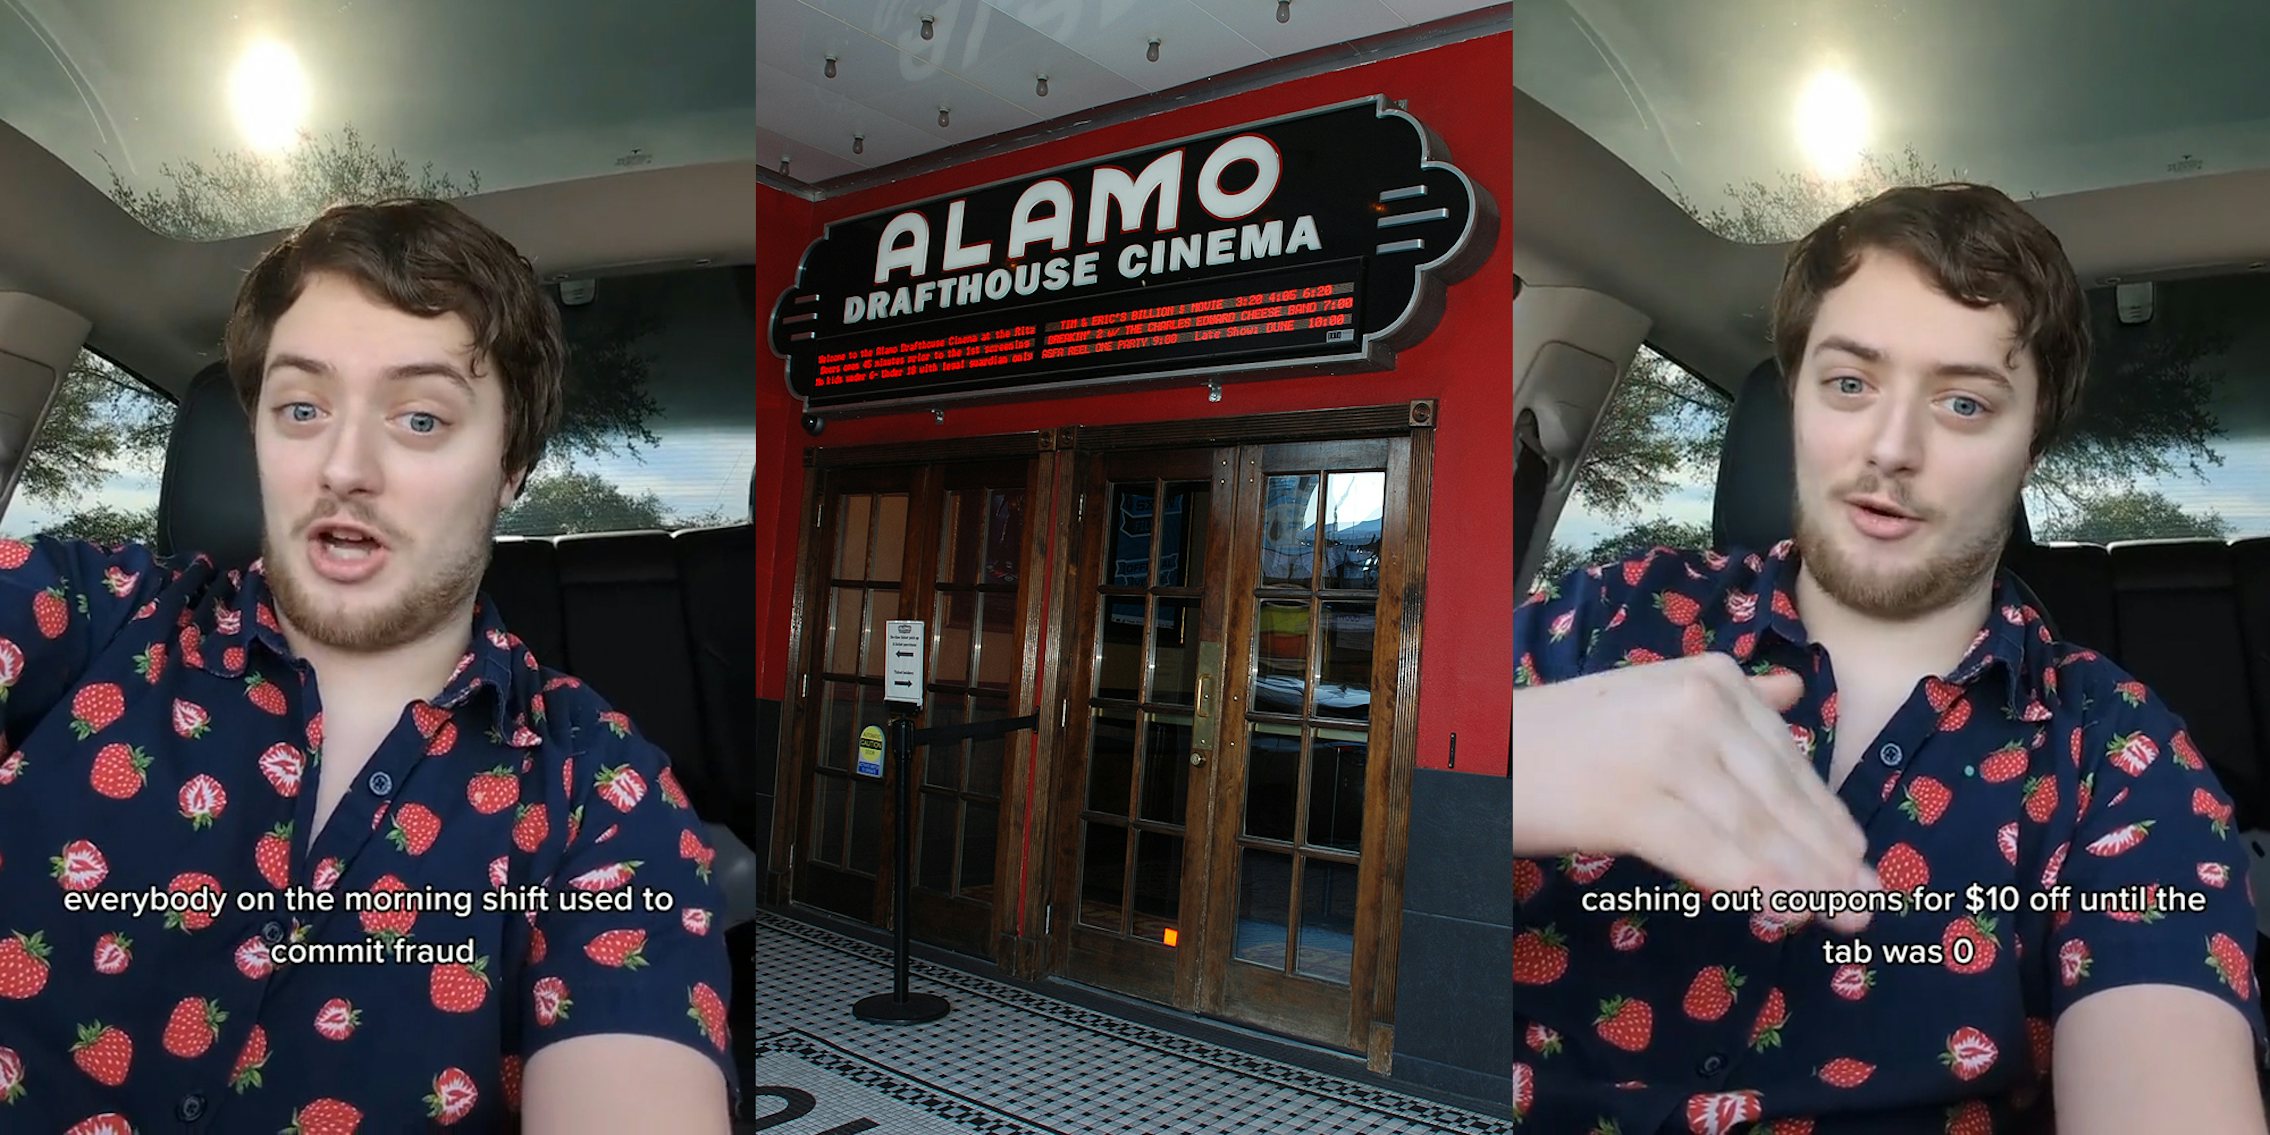 former Alamo Drafthouse employee speaking in car with caption 'everybody on the morning shift used to commit fraud' (l) Alamo Drafthouse Cinema sign above doors (c) former Alamo Drafthouse employee speaking in car with caption 'cashing out coupons for $10 off until the tab was 0' (r)